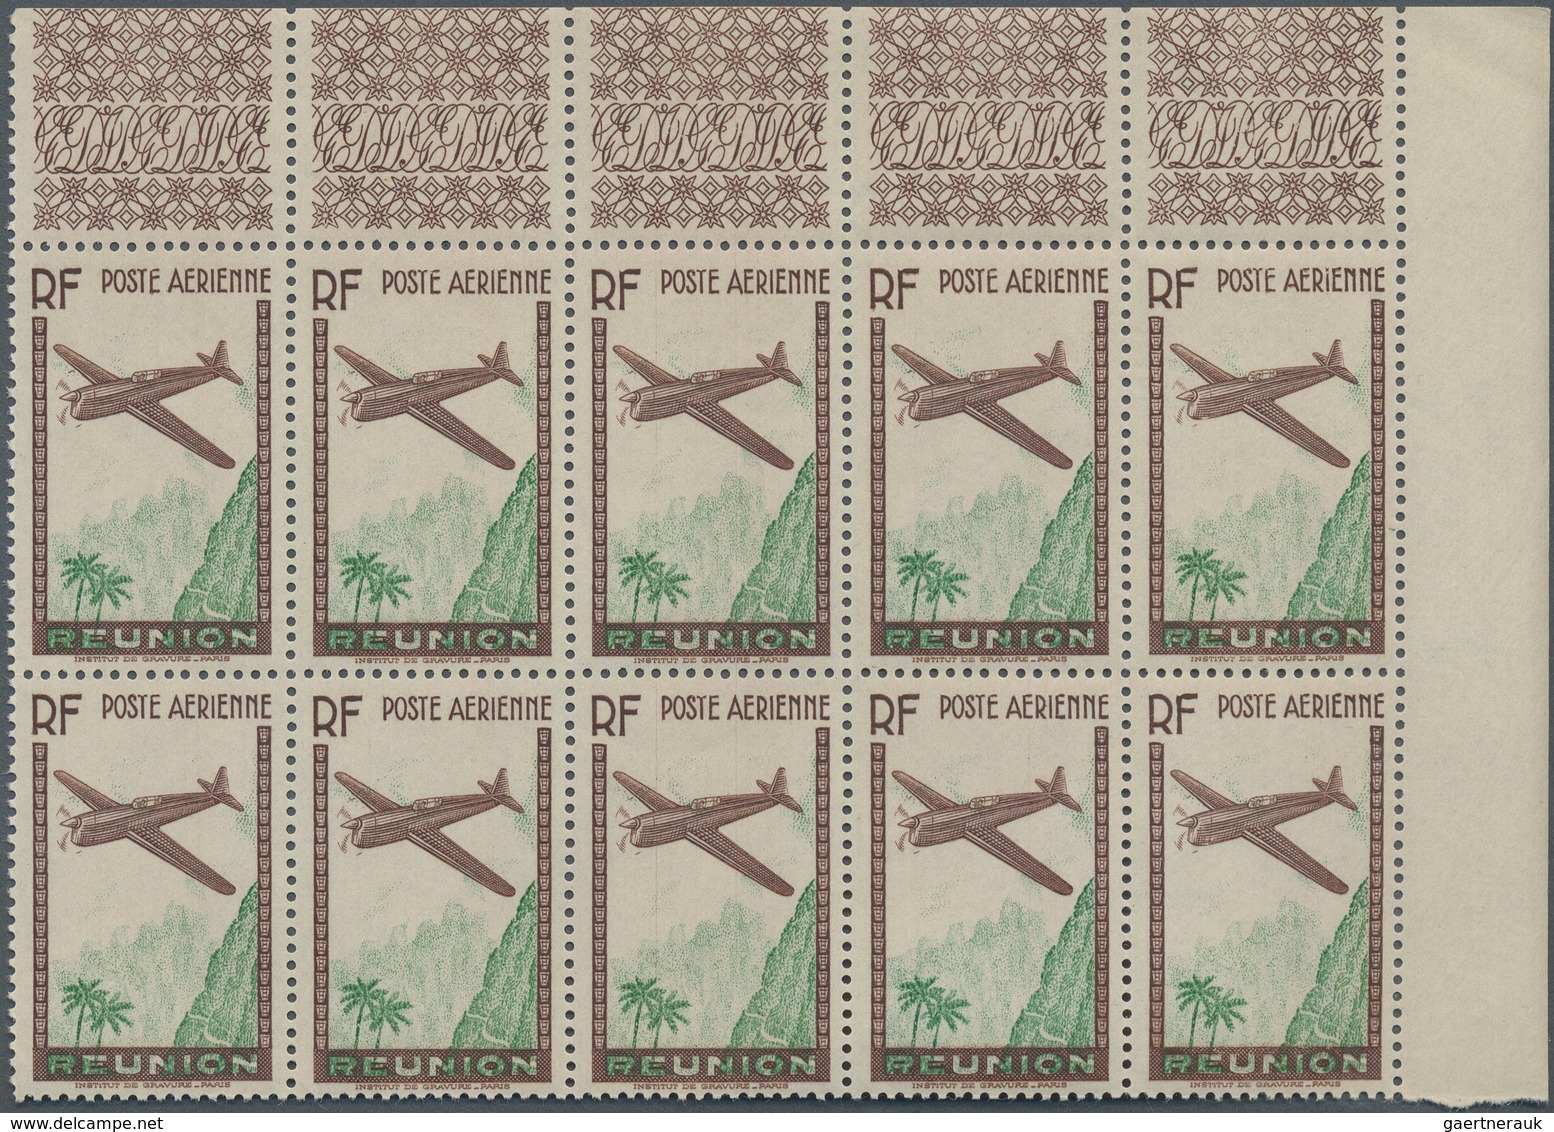 Reunion: 1938, Airmail Issue ‚airplane Over Mountains‘ (12.65fr.) Brown/green With MISSING DENOMINAT - Gebruikt